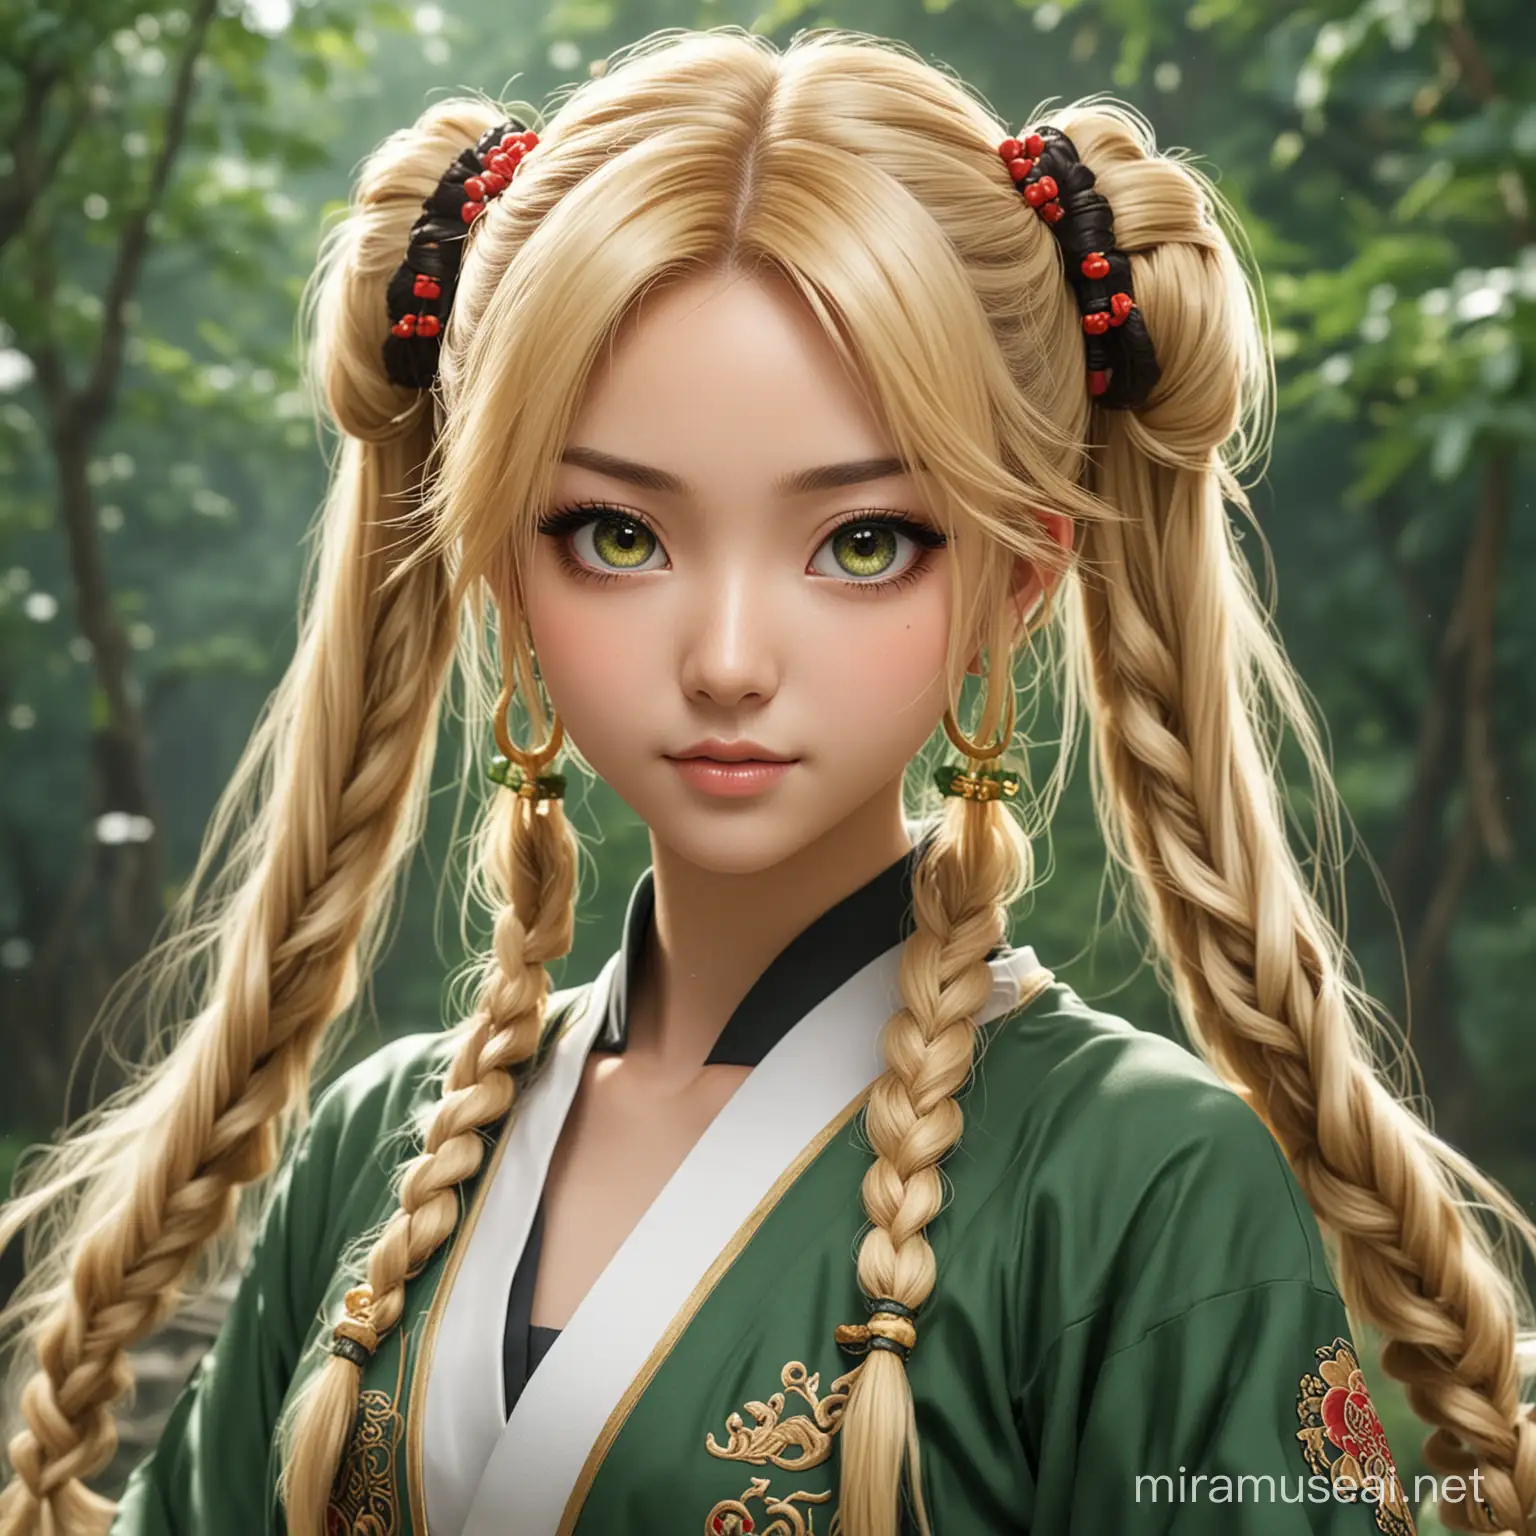 Adventurous Anime Girl with Elaborate Hairstyle and Jungle Green Eyes